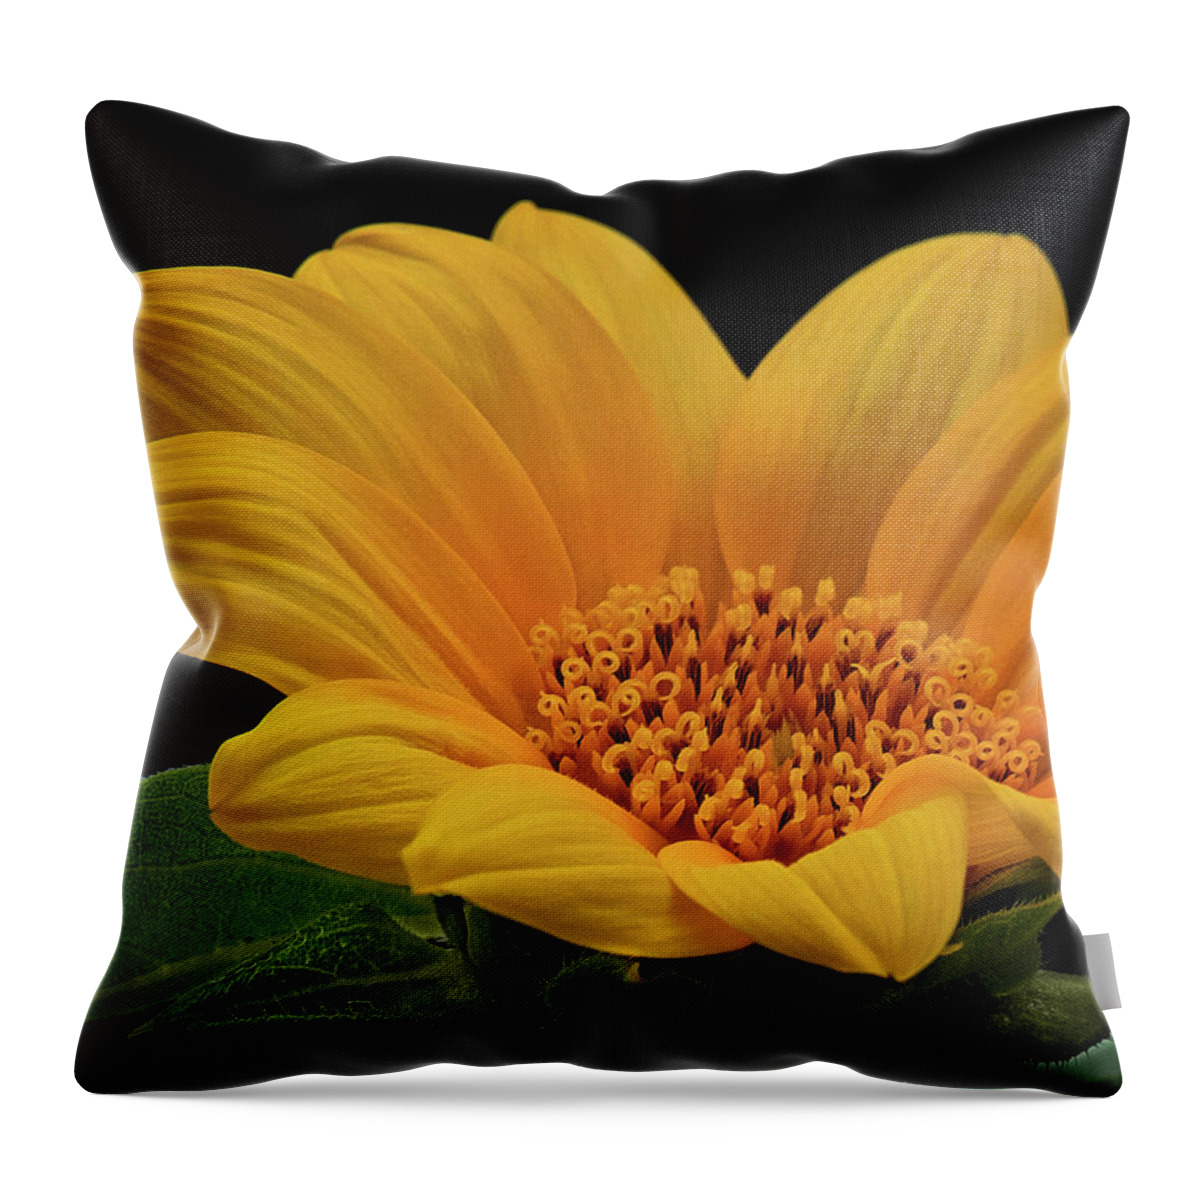 Sunflower Print Throw Pillow featuring the photograph Baby Sunflower by Gwen Gibson